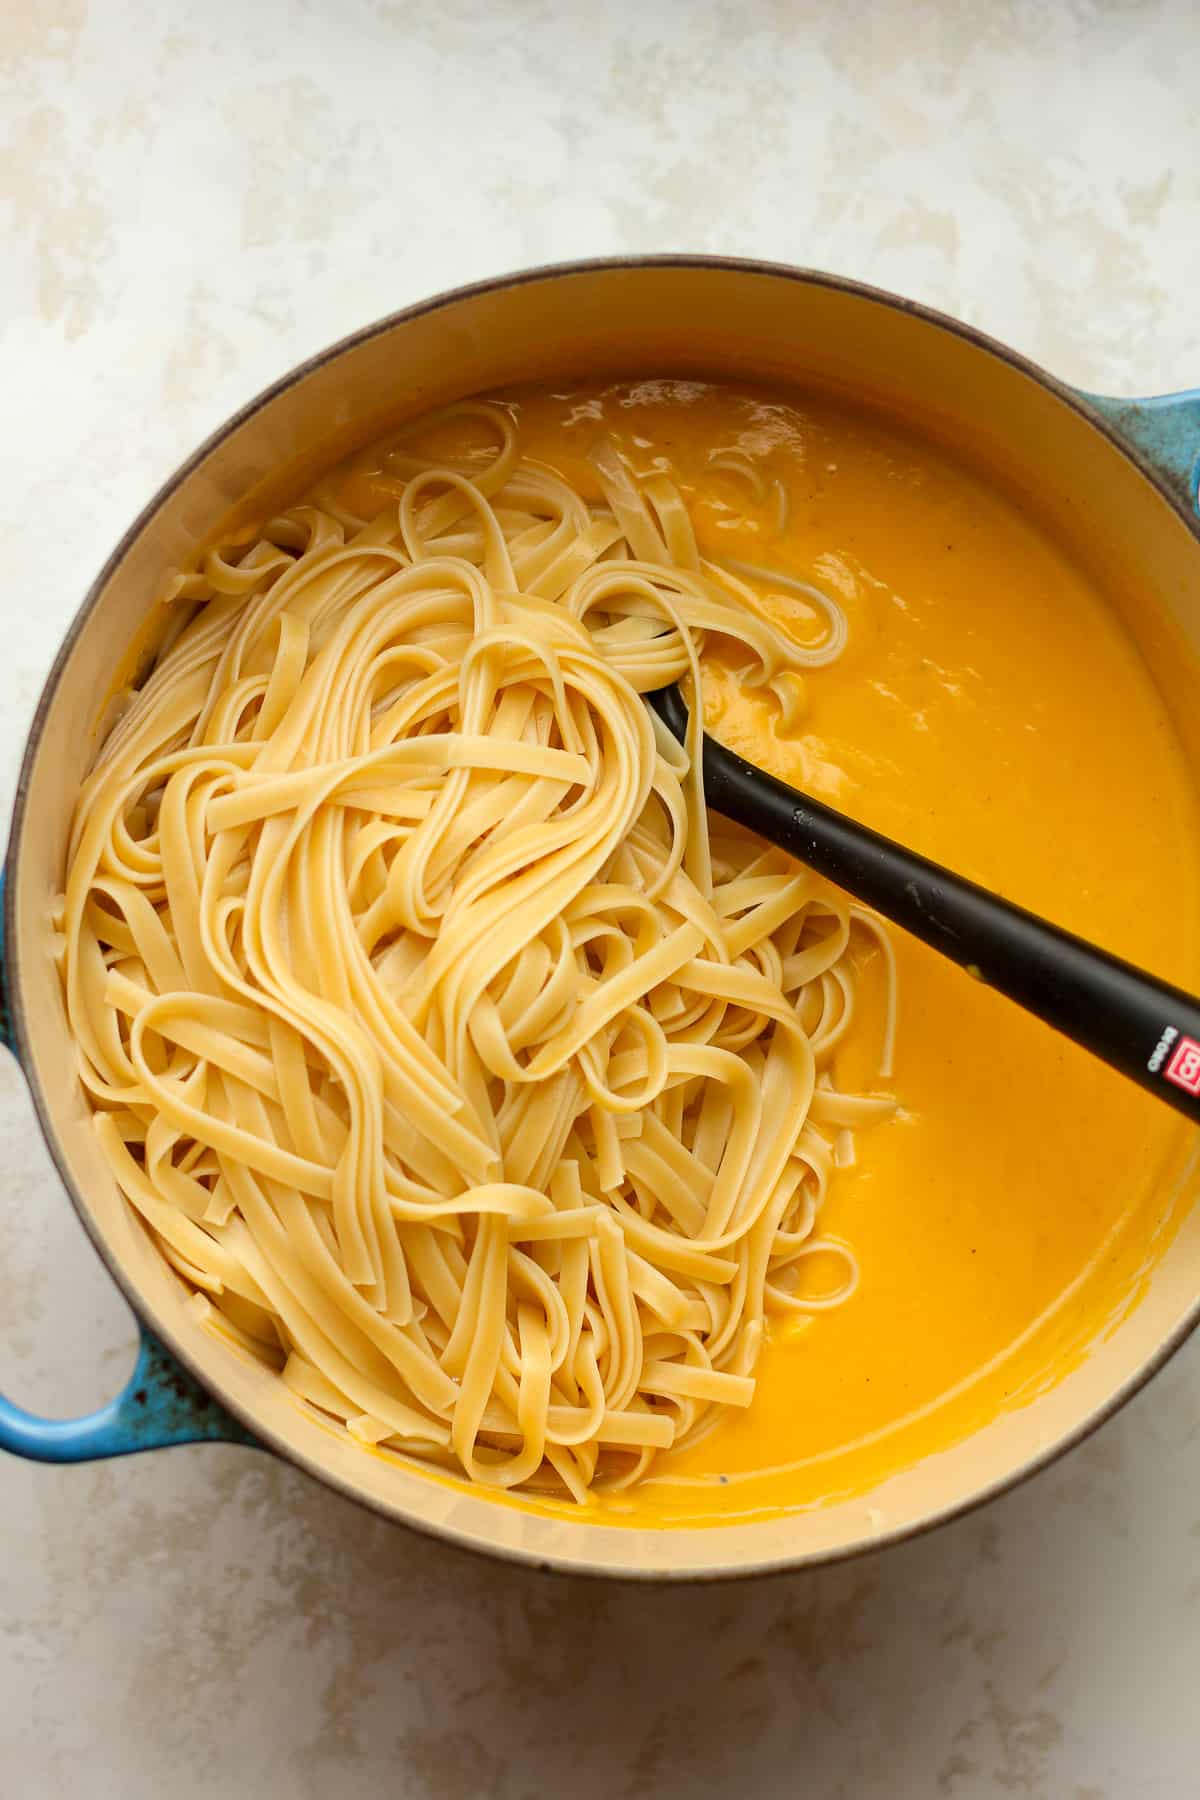 A stock pot of the butternut squash pasta sauce with fettuccine noodles.